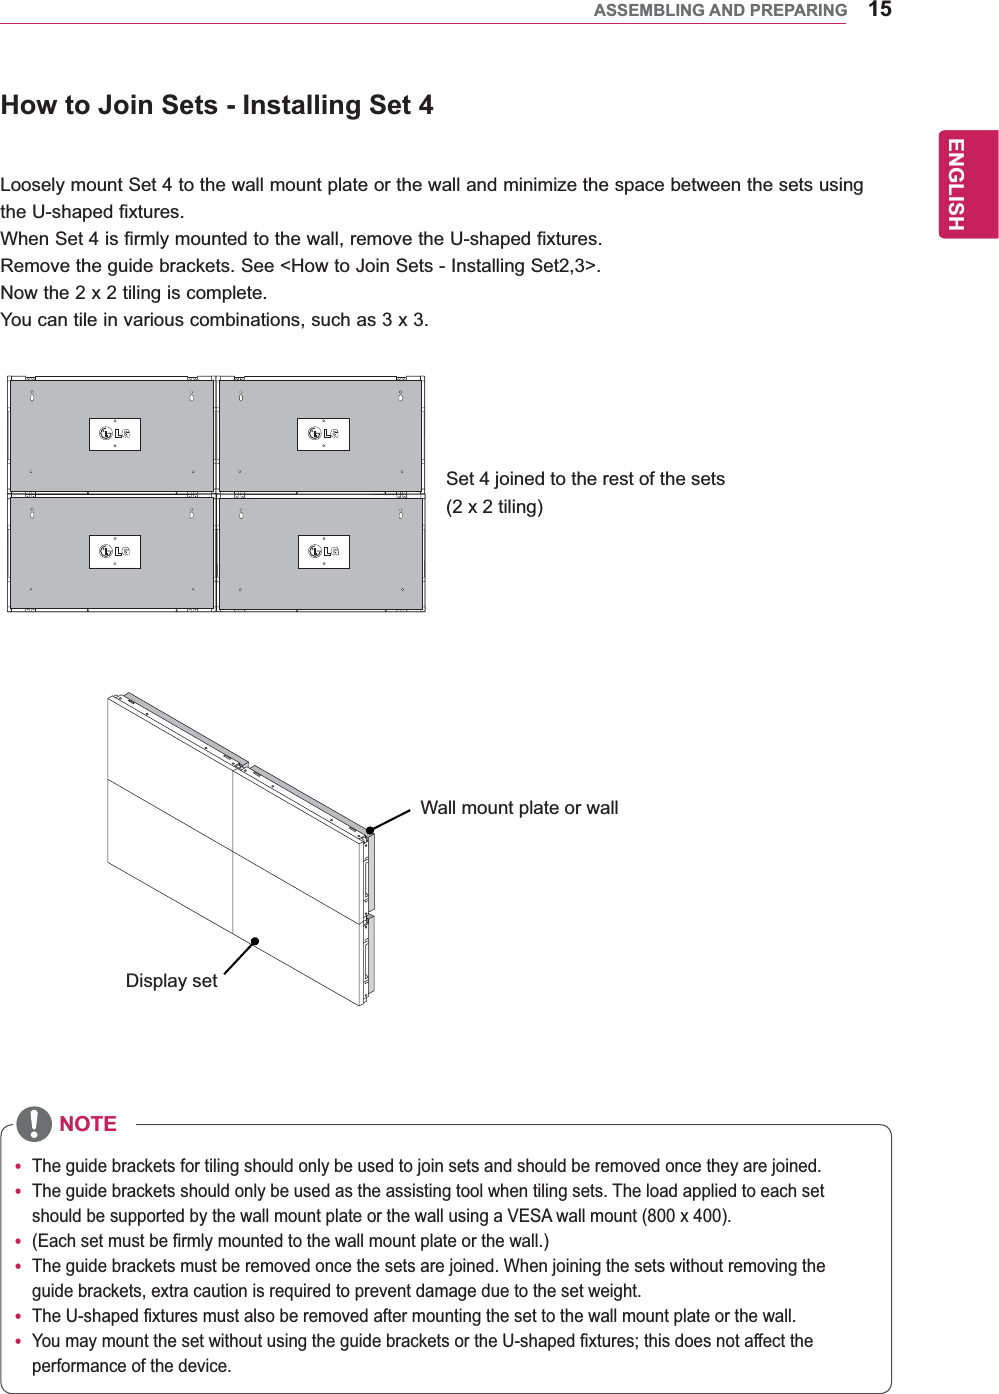 15ENGENGLISHASSEMBLING AND PREPARINGSet 4 joined to the rest of the sets(2 x 2 tiling)Wall mount plate or wallDisplay setLoosely mount Set 4 to the wall mount plate or the wall and minimize the space between the sets using the U-shaped fixtures. When Set 4 is firmly mounted to the wall, remove the U-shaped fixtures.Remove the guide brackets. See &lt;How to Join Sets - Installing Set2,3&gt;.Now the 2 x 2 tiling is complete.You can tile in various combinations, such as 3 x 3.How to Join Sets - Installing Set 4y The guide brackets for tiling should only be used to join sets and should be removed once they are joined.y The guide brackets should only be used as the assisting tool when tiling sets. The load applied to each set should be supported by the wall mount plate or the wall using a VESA wall mount (800 x 400).y (Each set must be firmly mounted to the wall mount plate or the wall.)y The guide brackets must be removed once the sets are joined. When joining the sets without removing the guide brackets, extra caution is required to prevent damage due to the set weight.y The U-shaped fixtures must also be removed after mounting the set to the wall mount plate or the wall.y performance of the device.NOTE